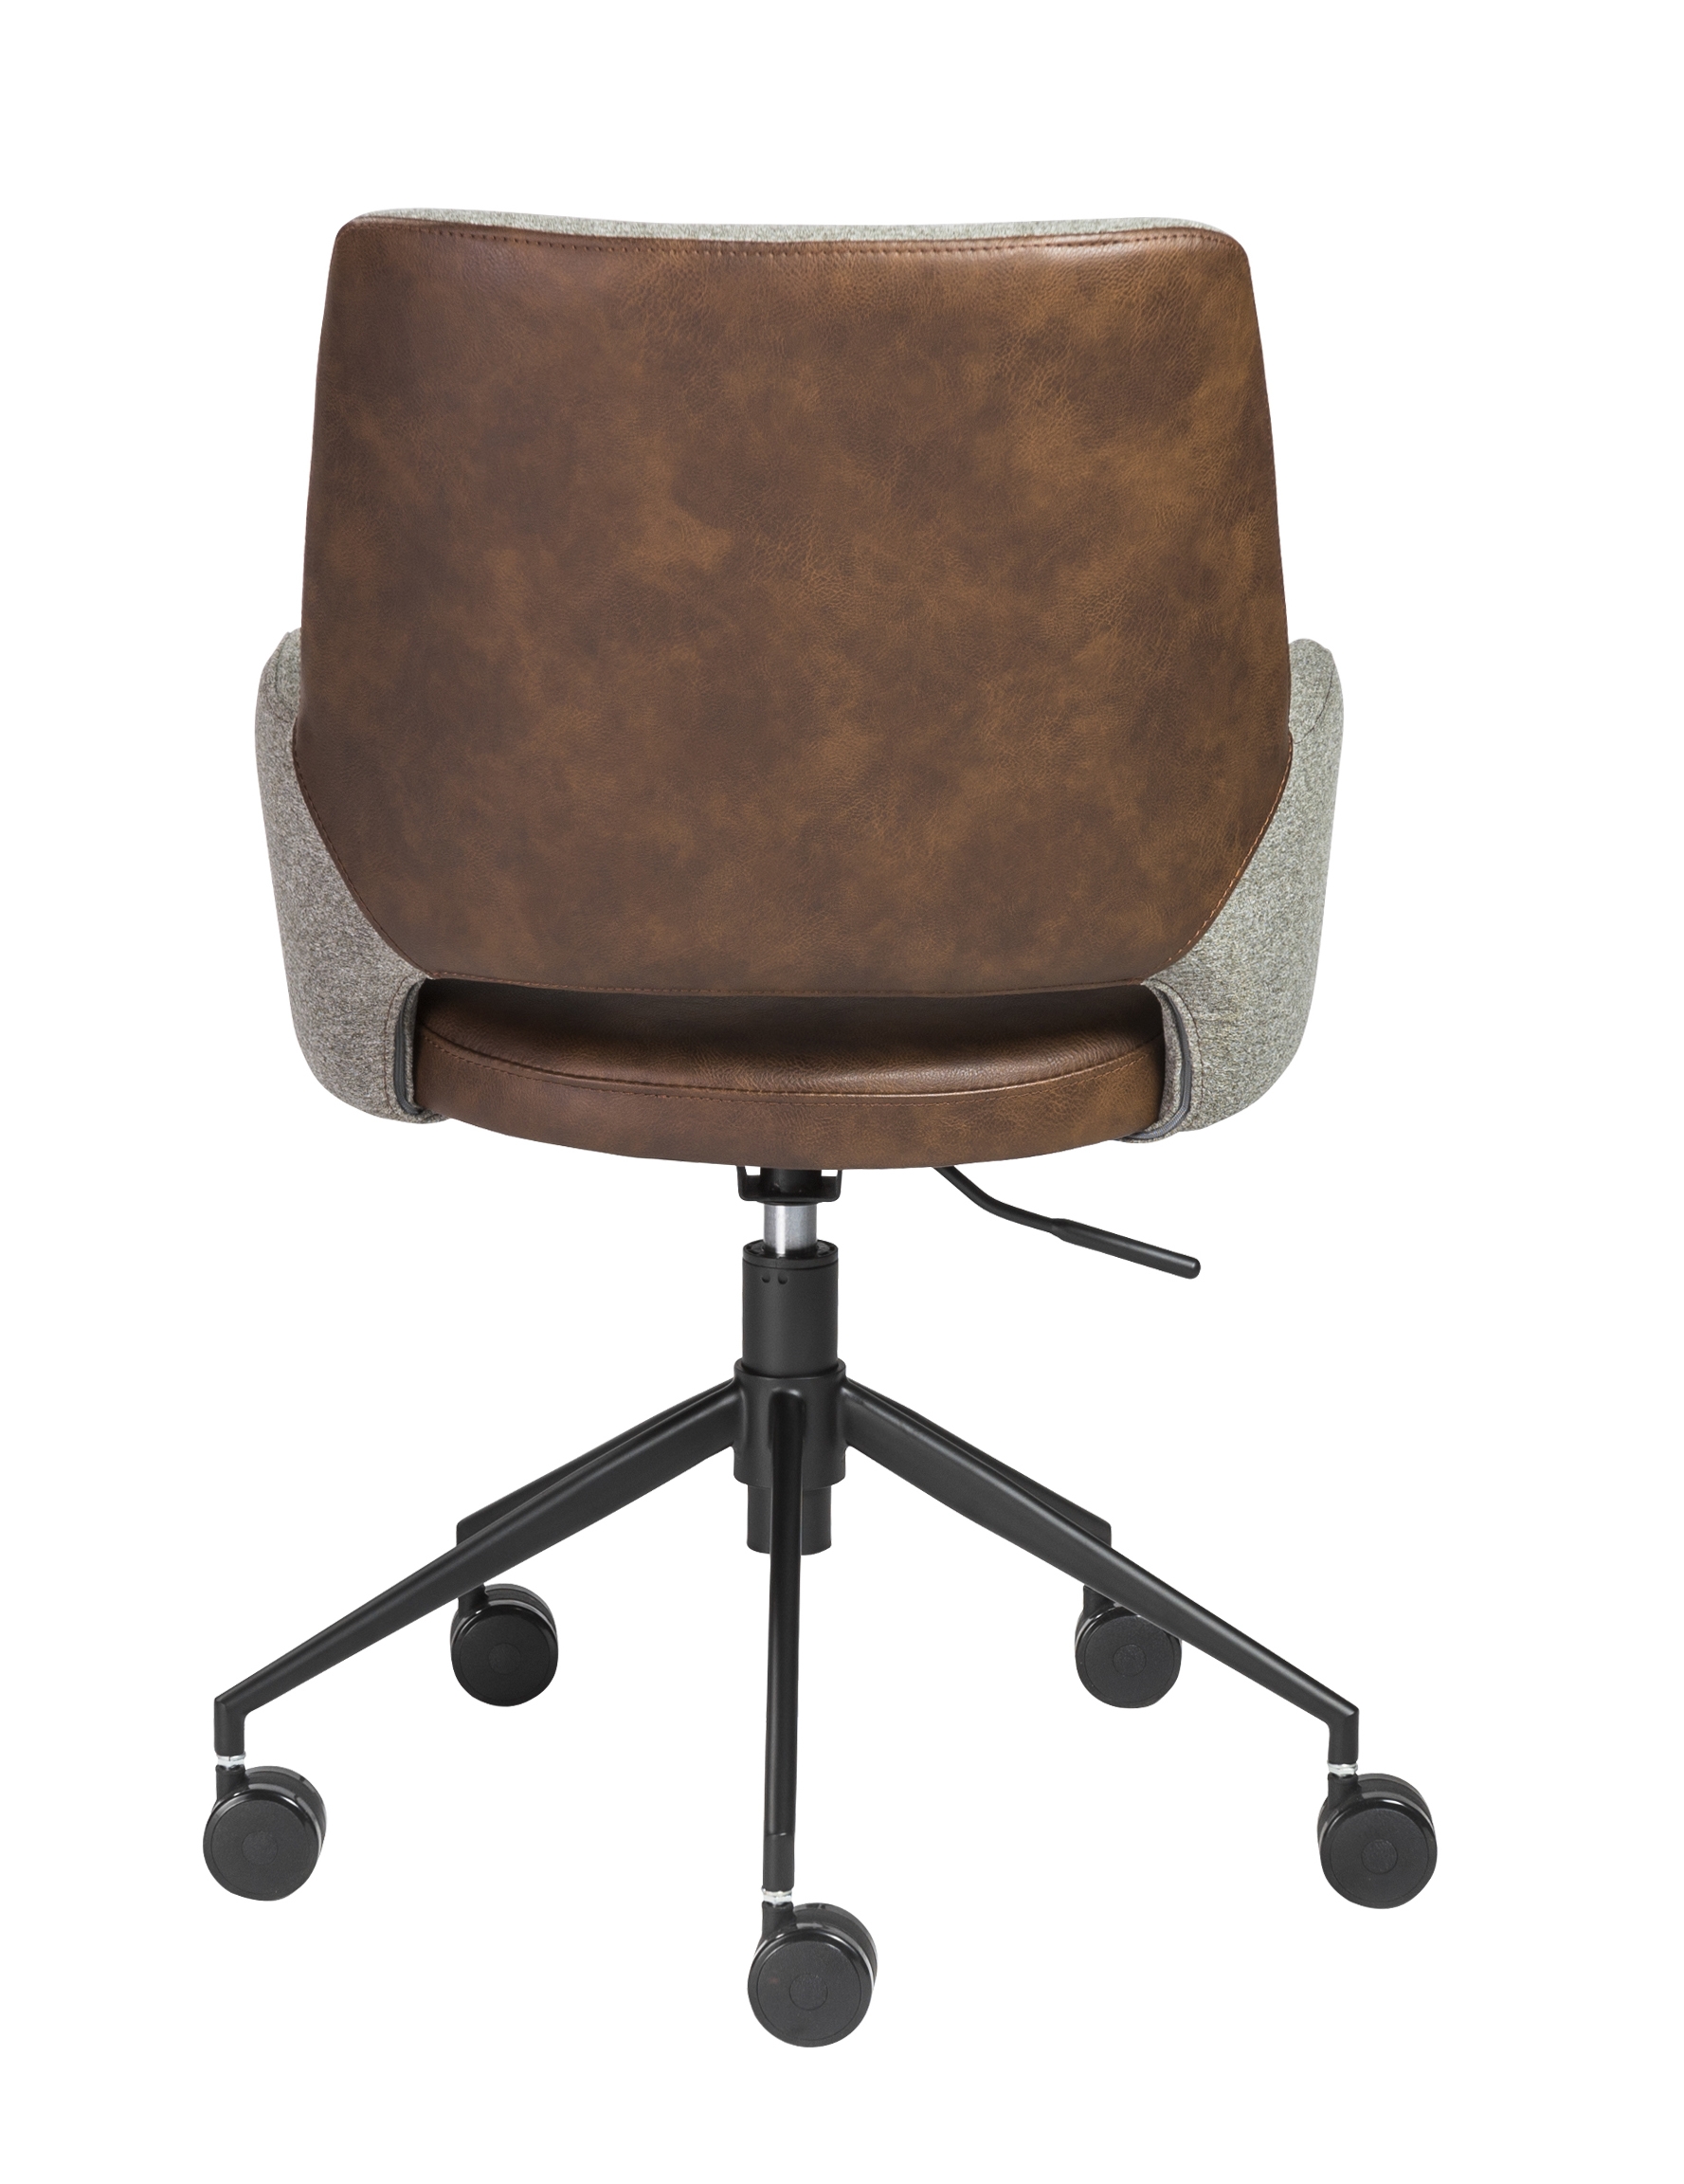 Randy Office Chair - Image 4